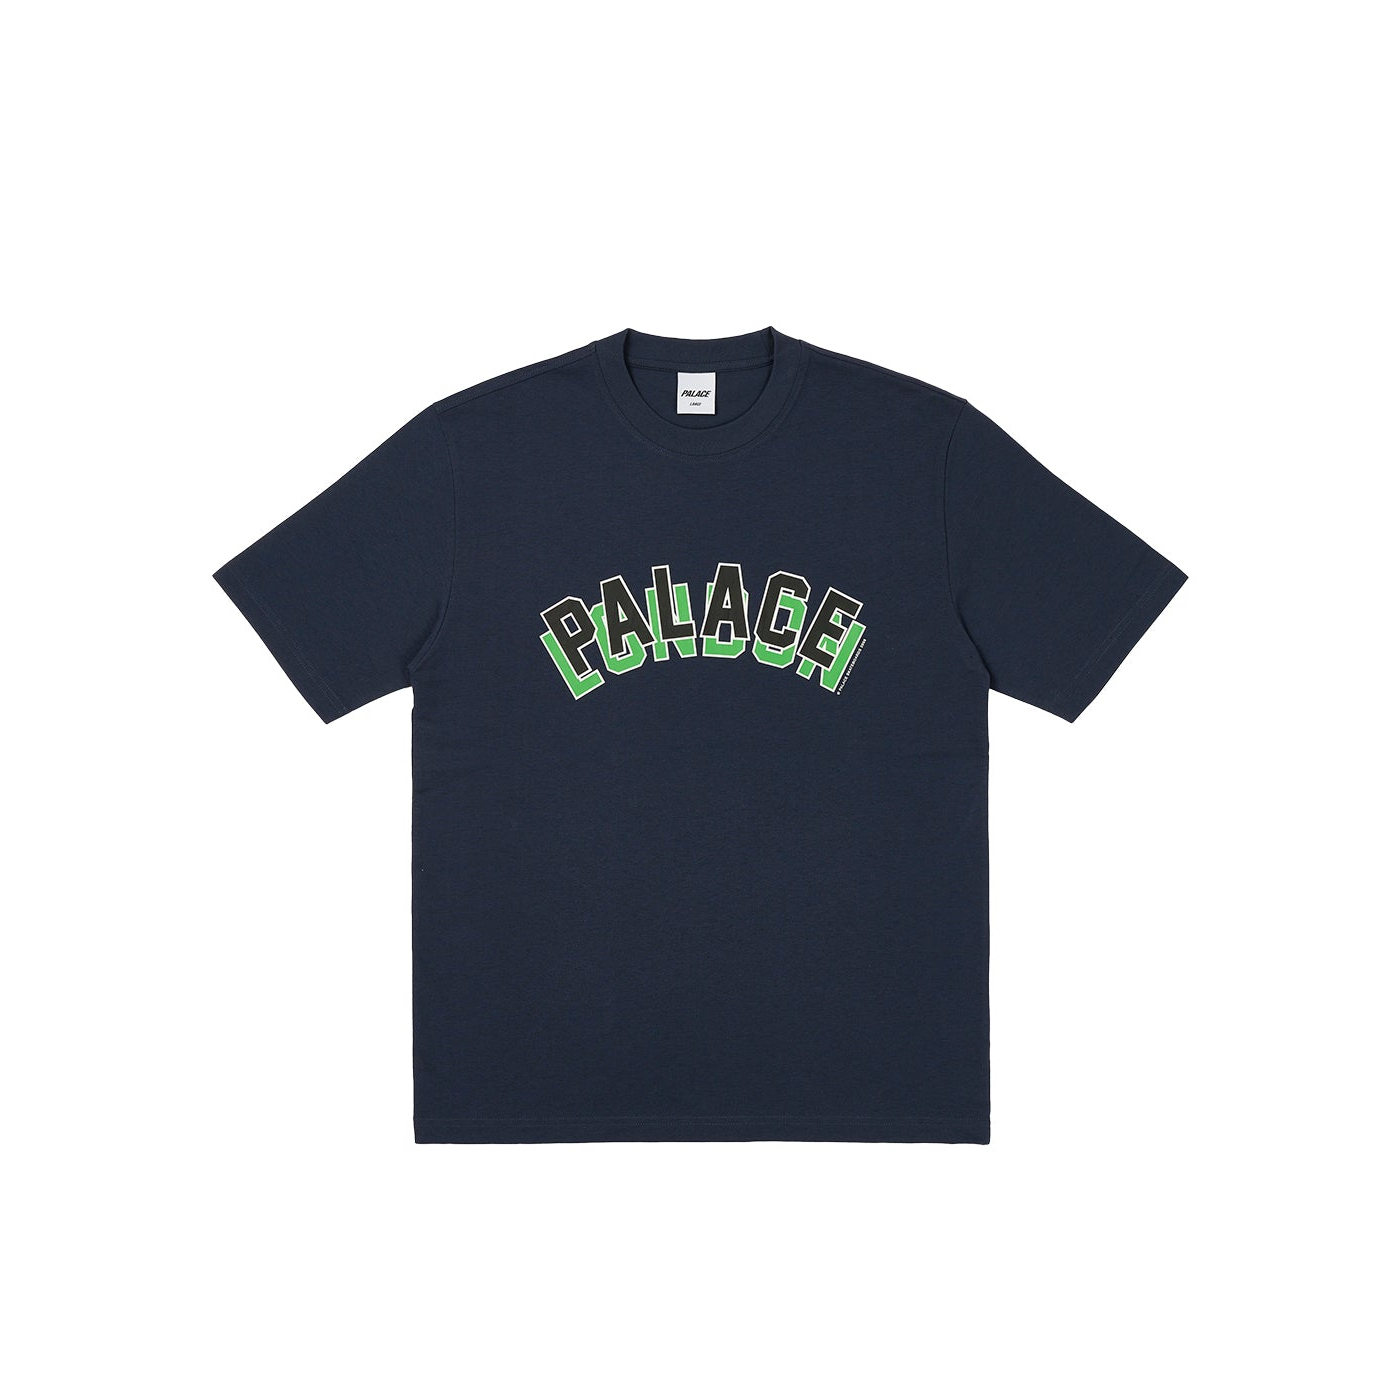 Thumbnail LONDON STACK T-SHIRT NAVY one color